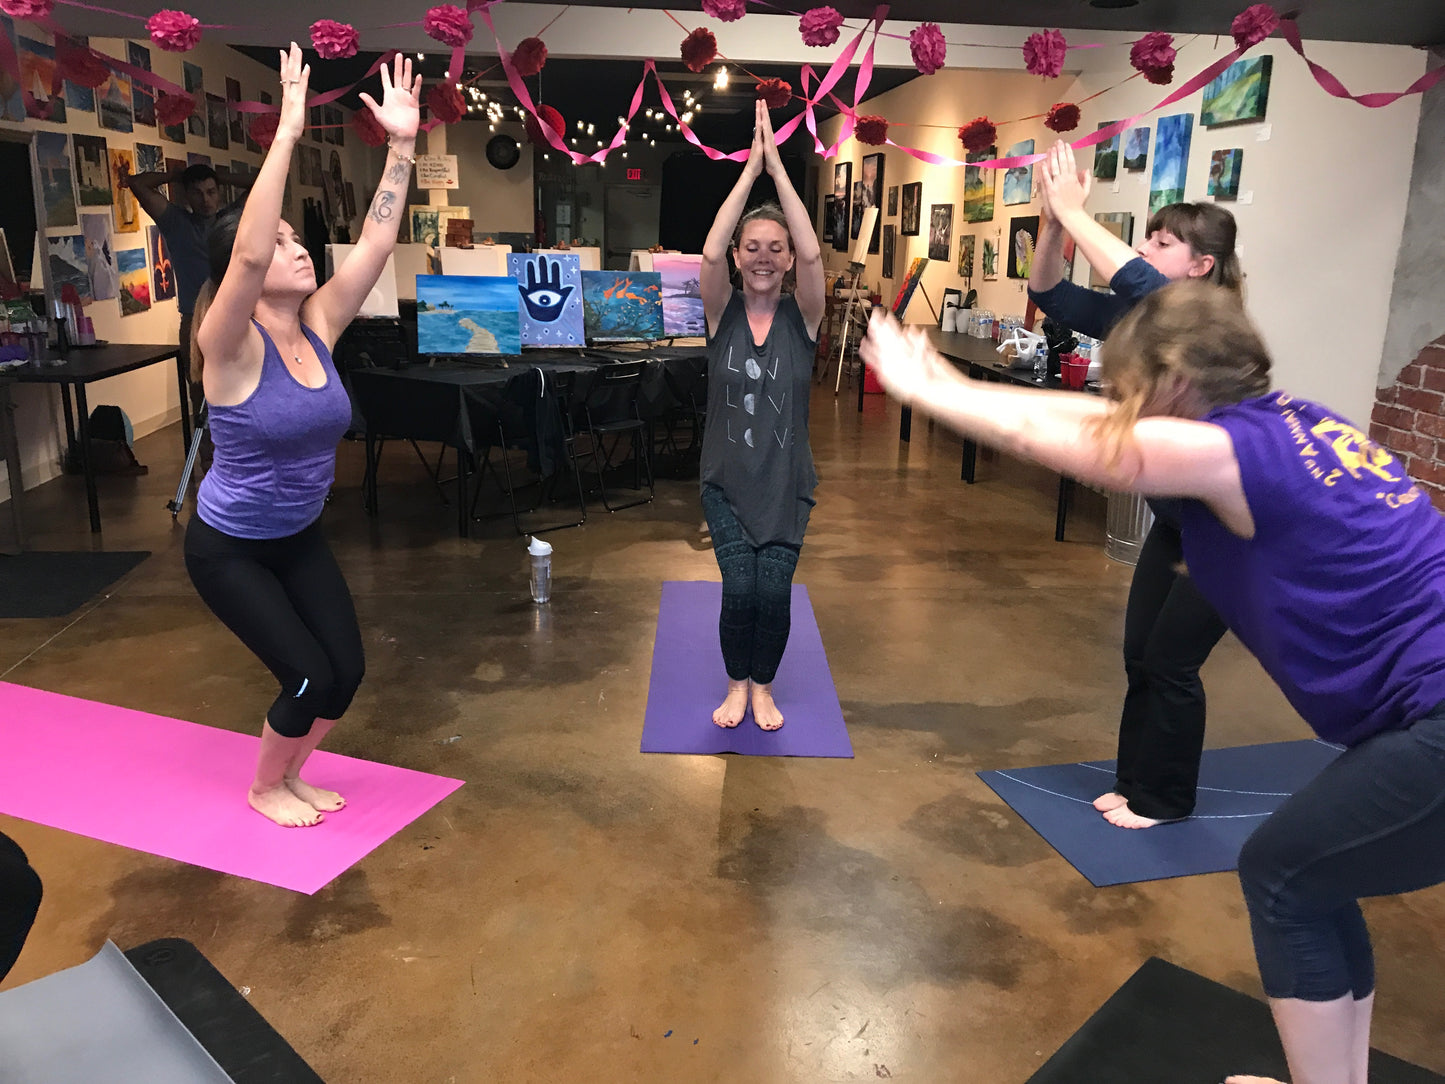 Wed, Oct 31, 9-12am Slow Flow Mojo Public Houston Yoga and Paint Class